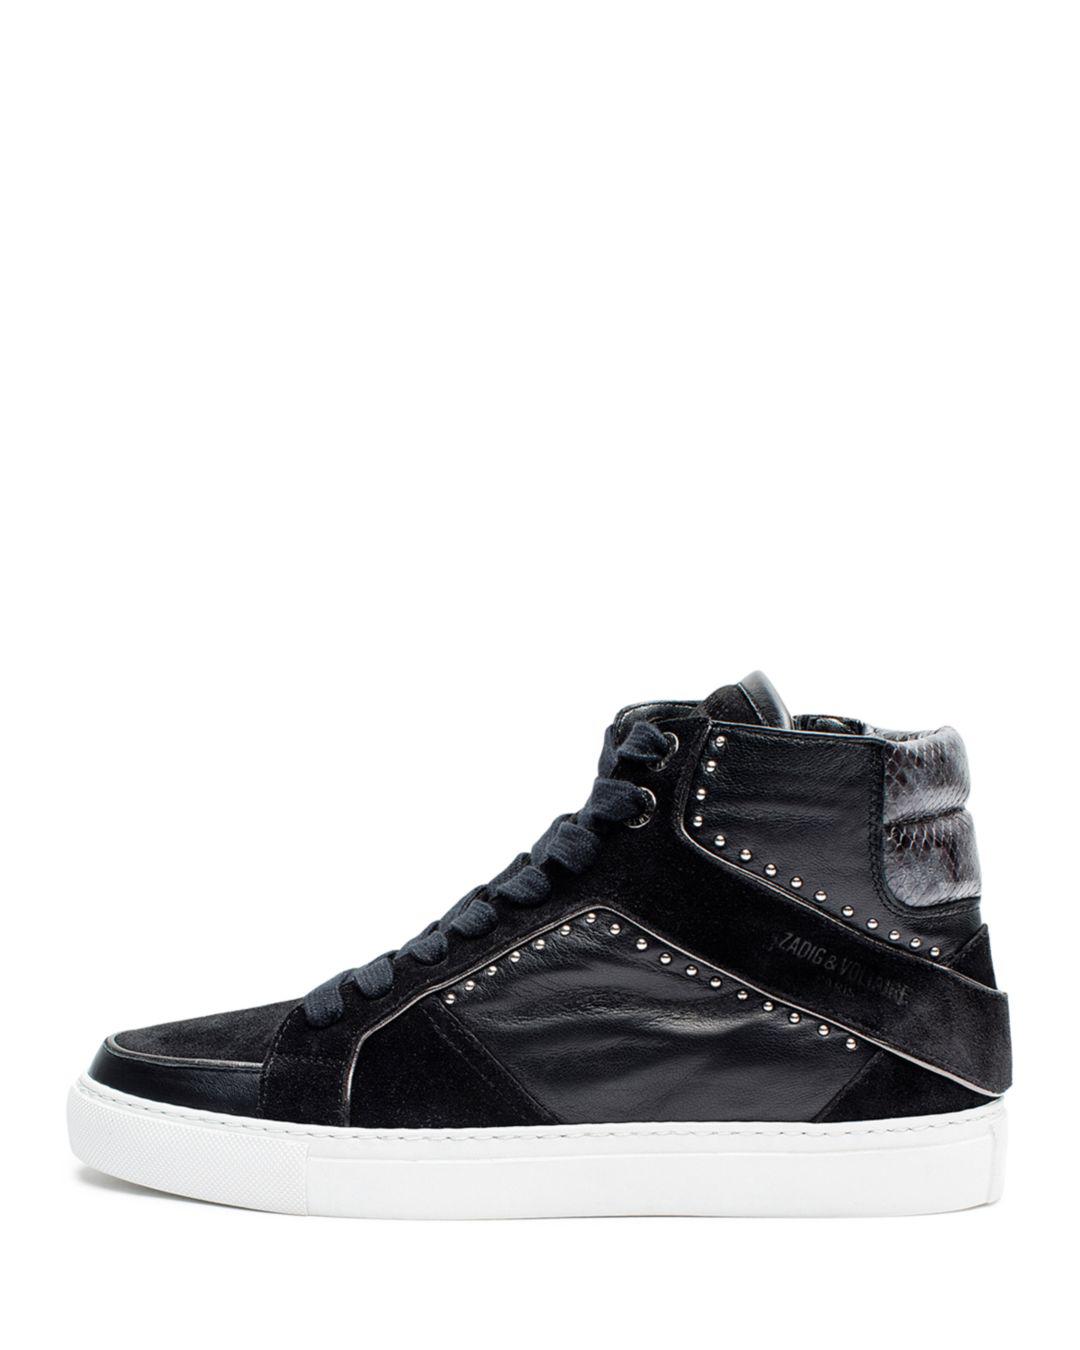 Zadig & Voltaire Leather Zv1747 High Sneakers in Black - Lyst